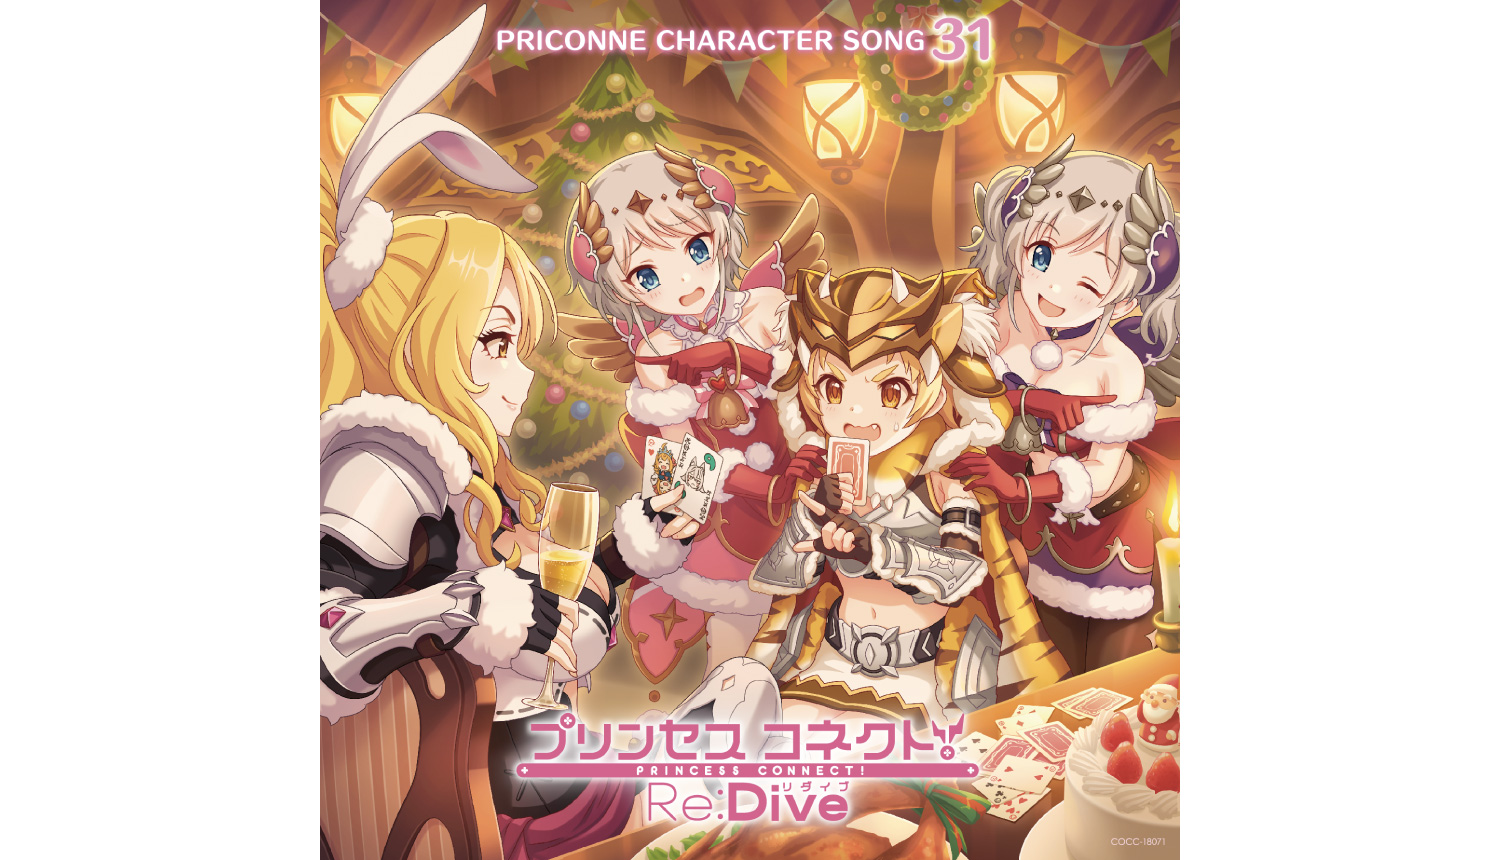 Anime RPG Princess Connect! Re:Dive Gets 31st Character Song CD